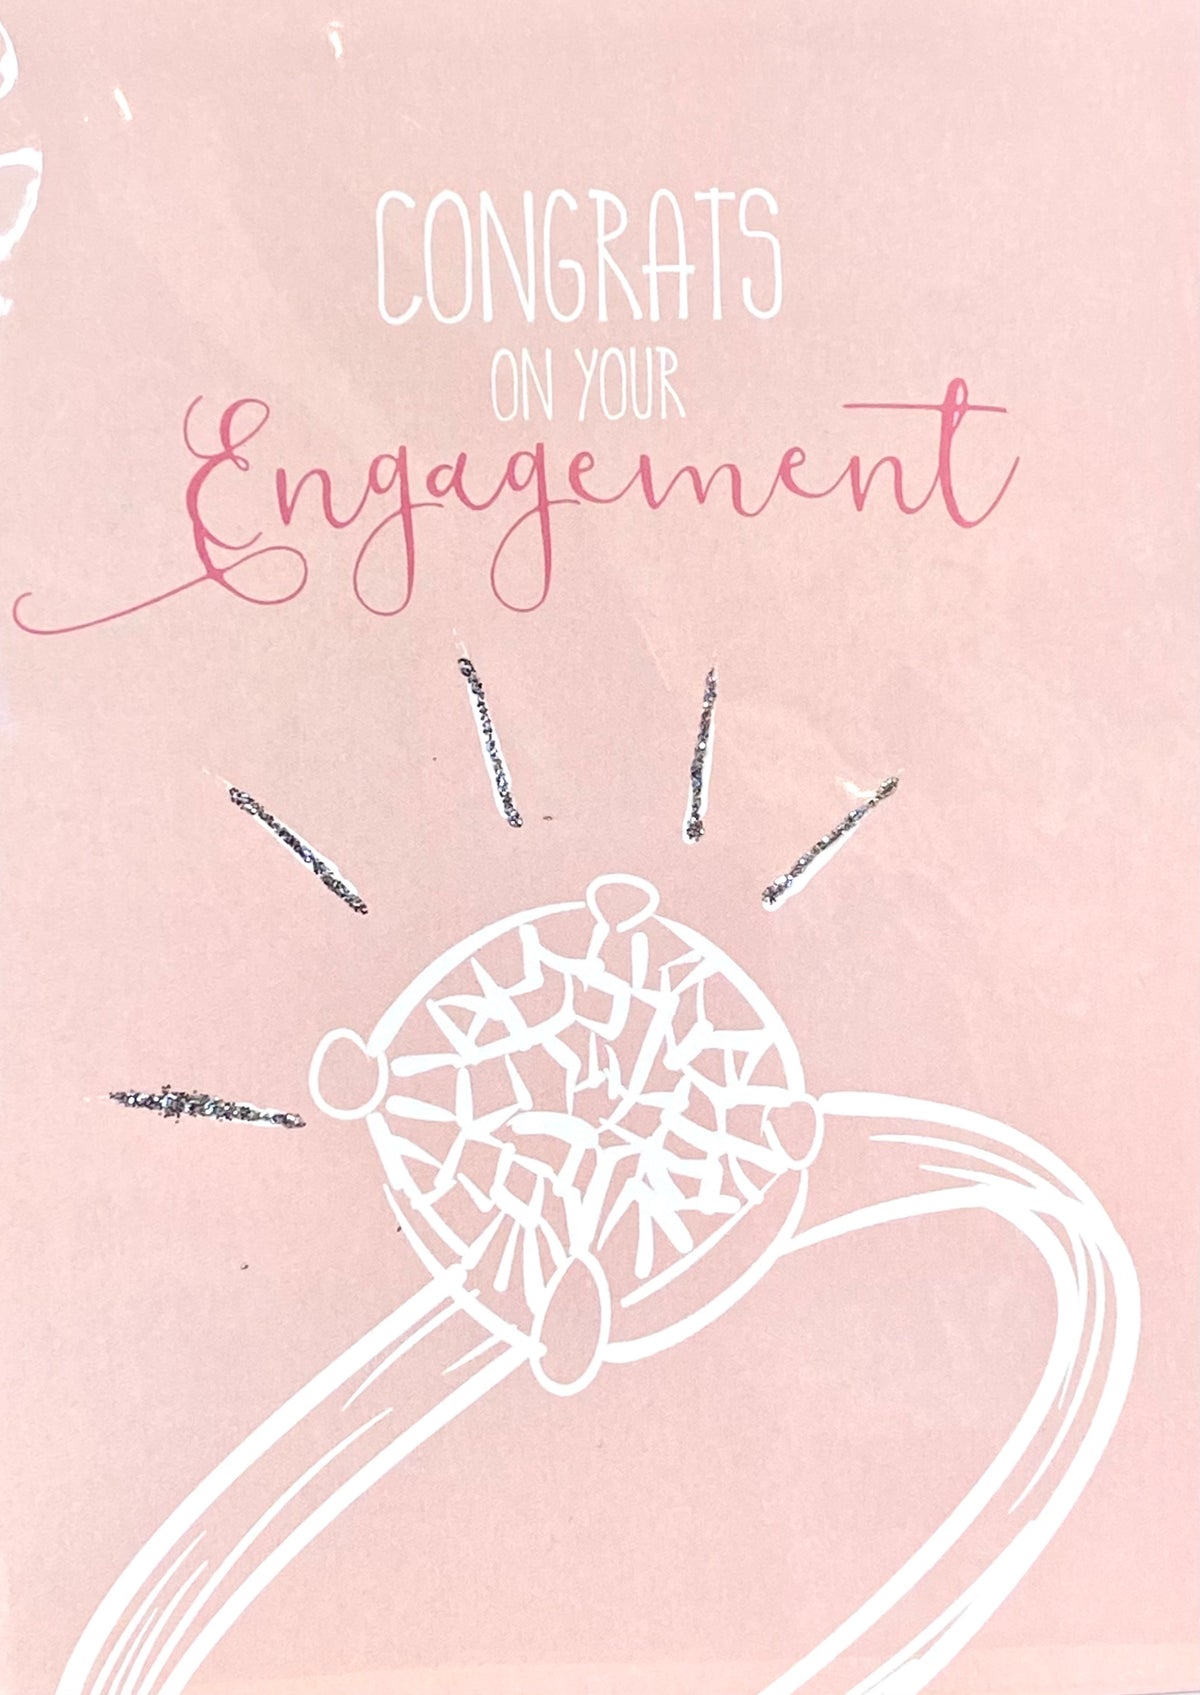 Congrats on Your Engagement Card- Engagement Ring With Glitter Accent